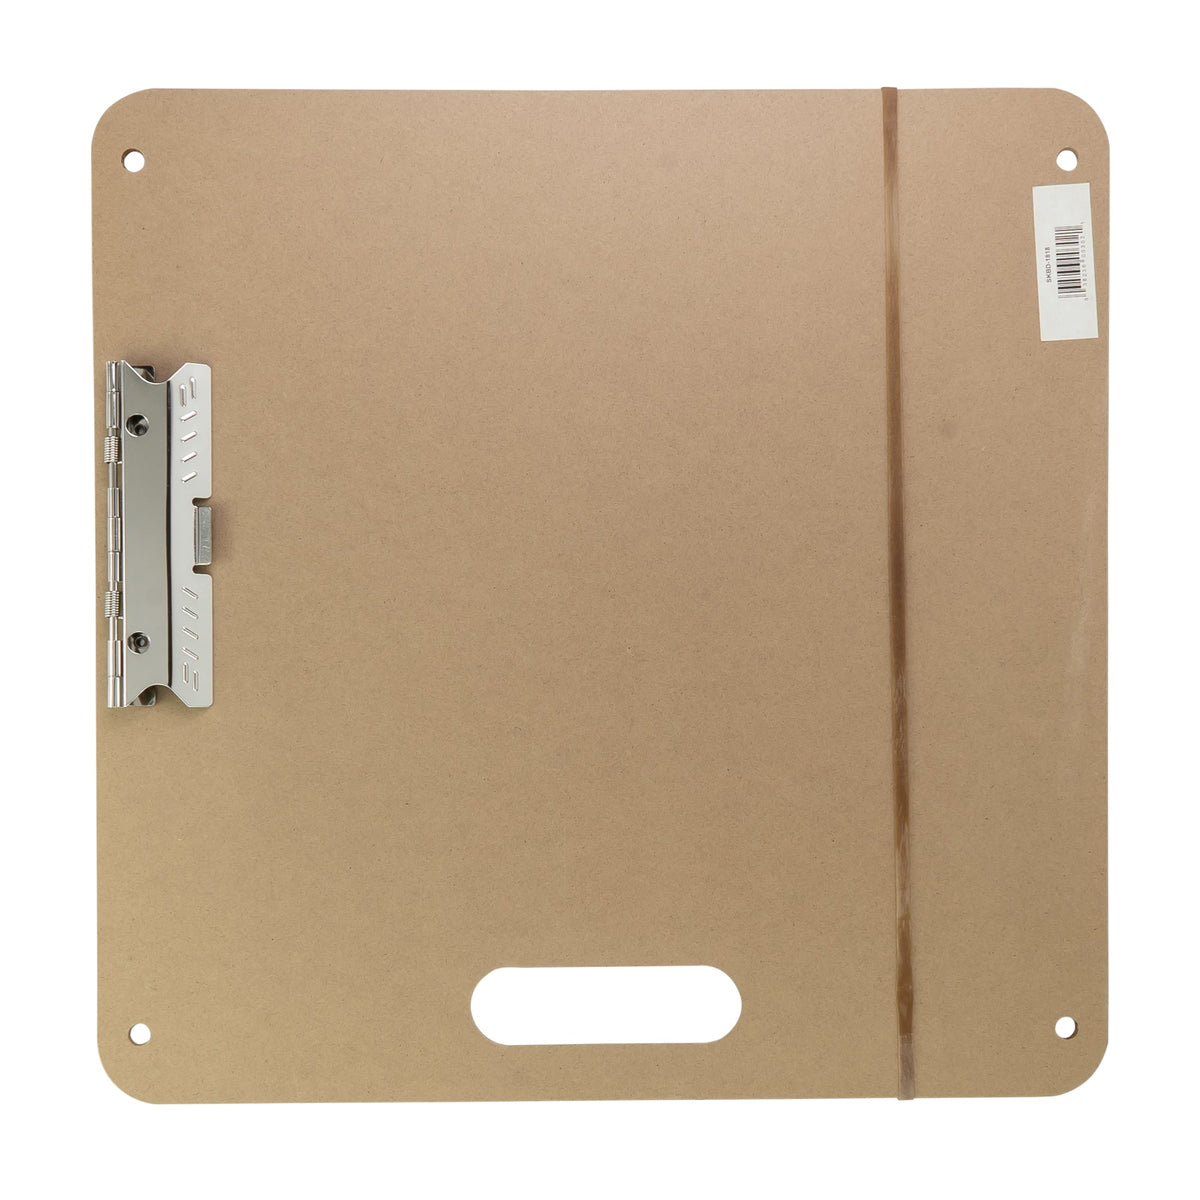 Field Sketch Board, Masonite with Cutout Handle, Clip, and Strap Holes, 13 Inch X 19 Inch